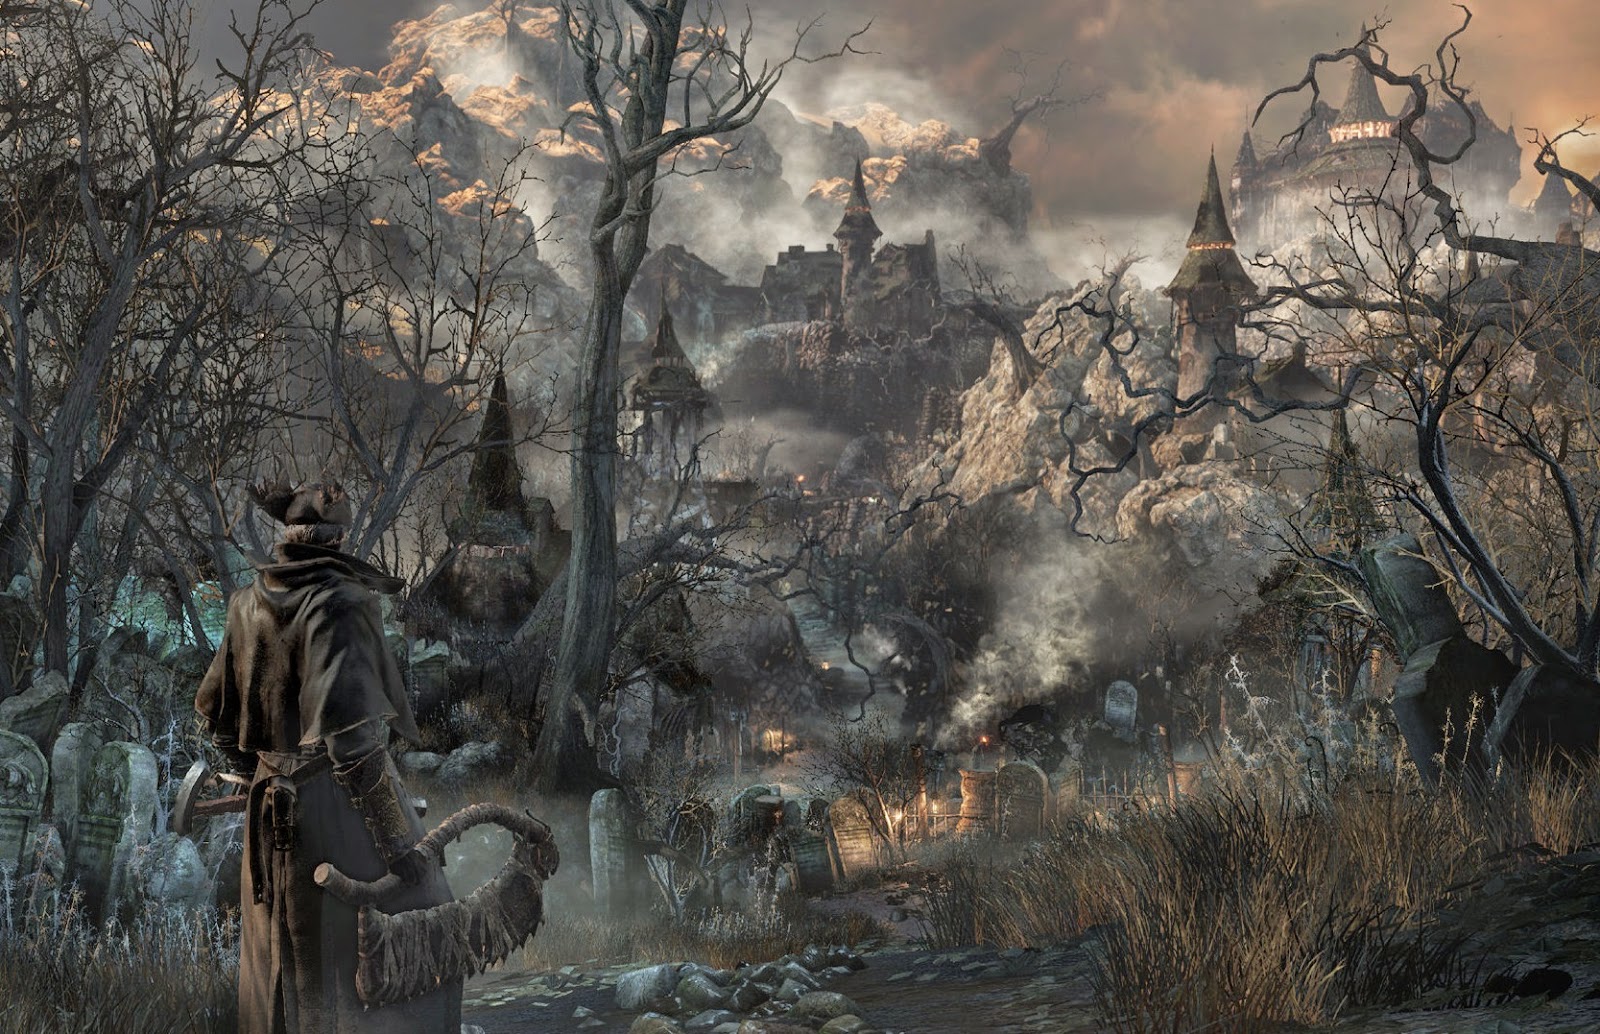 Bloodborne PlayStation 4 Review